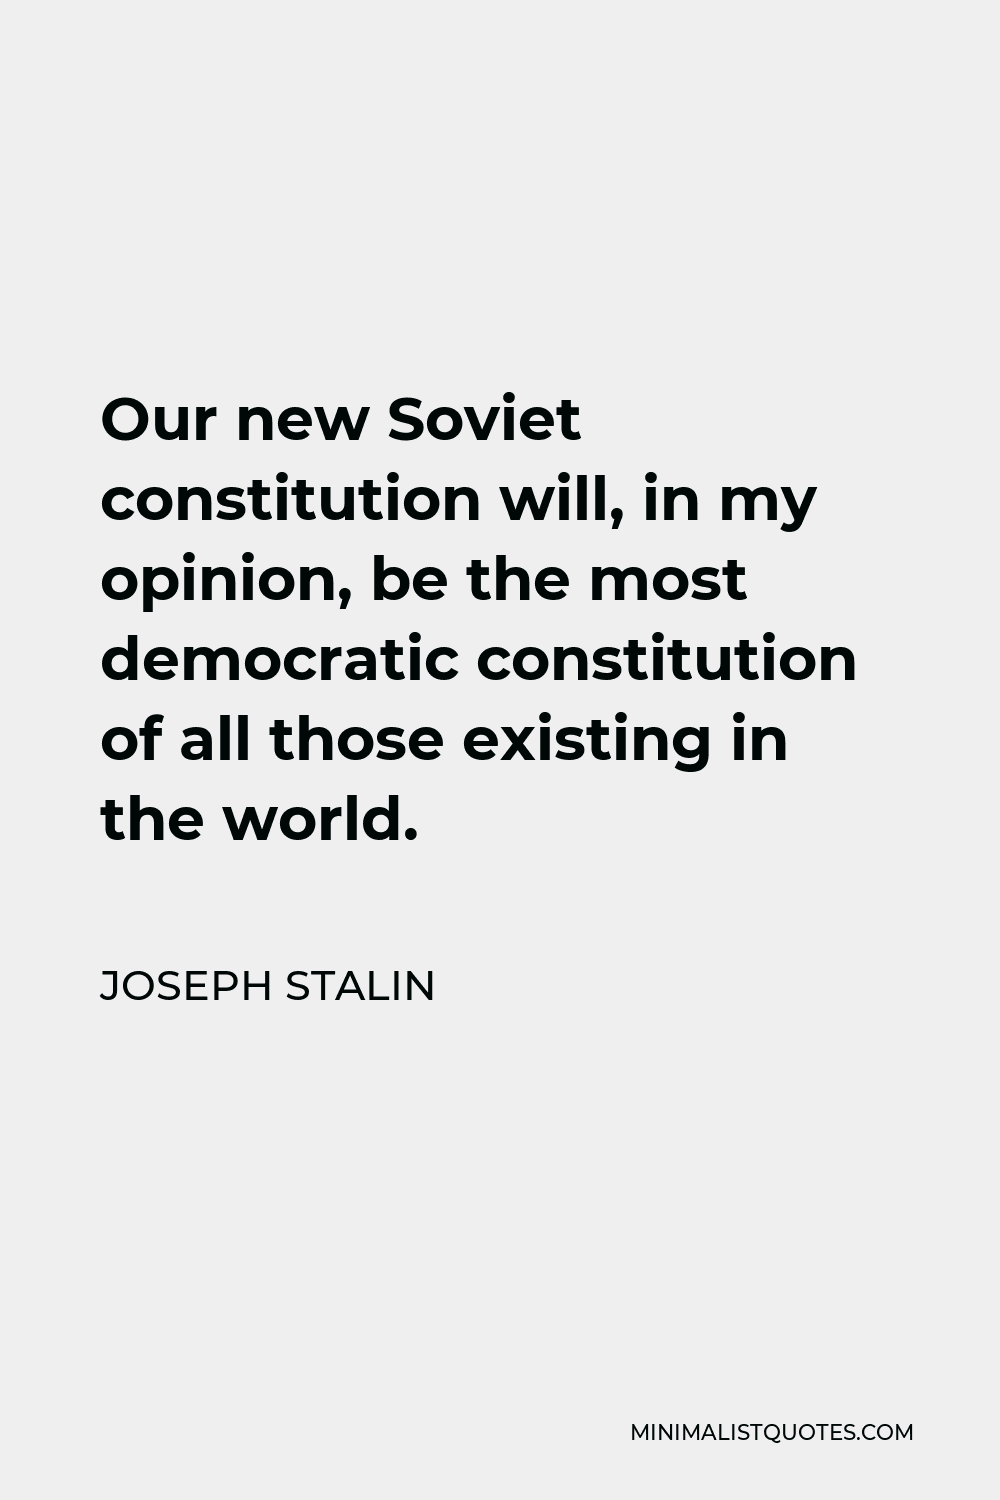 Joseph Stalin Quote - Our new Soviet constitution will, in my opinion, be the most democratic constitution of all those existing in the world.